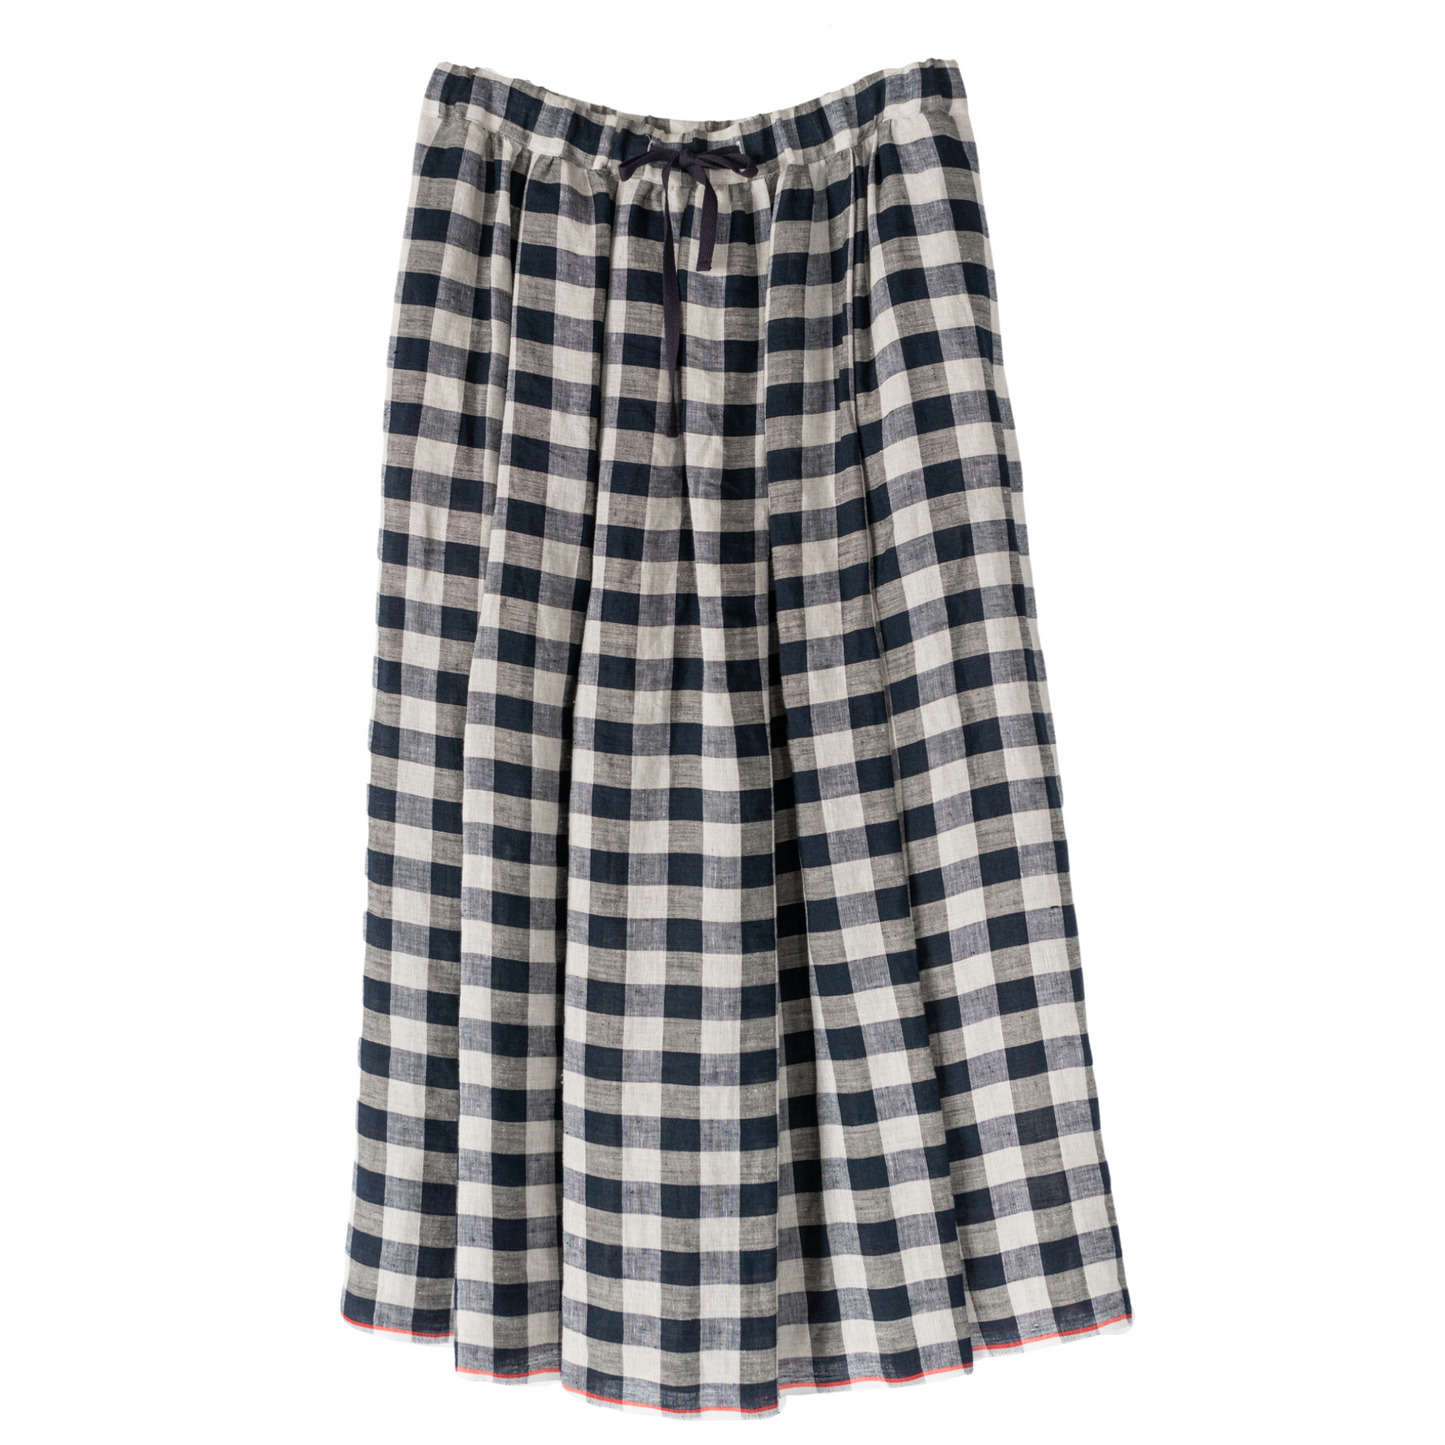 STAMP AND DIARY SELVEDGE LINEN GATHERED SKIRT